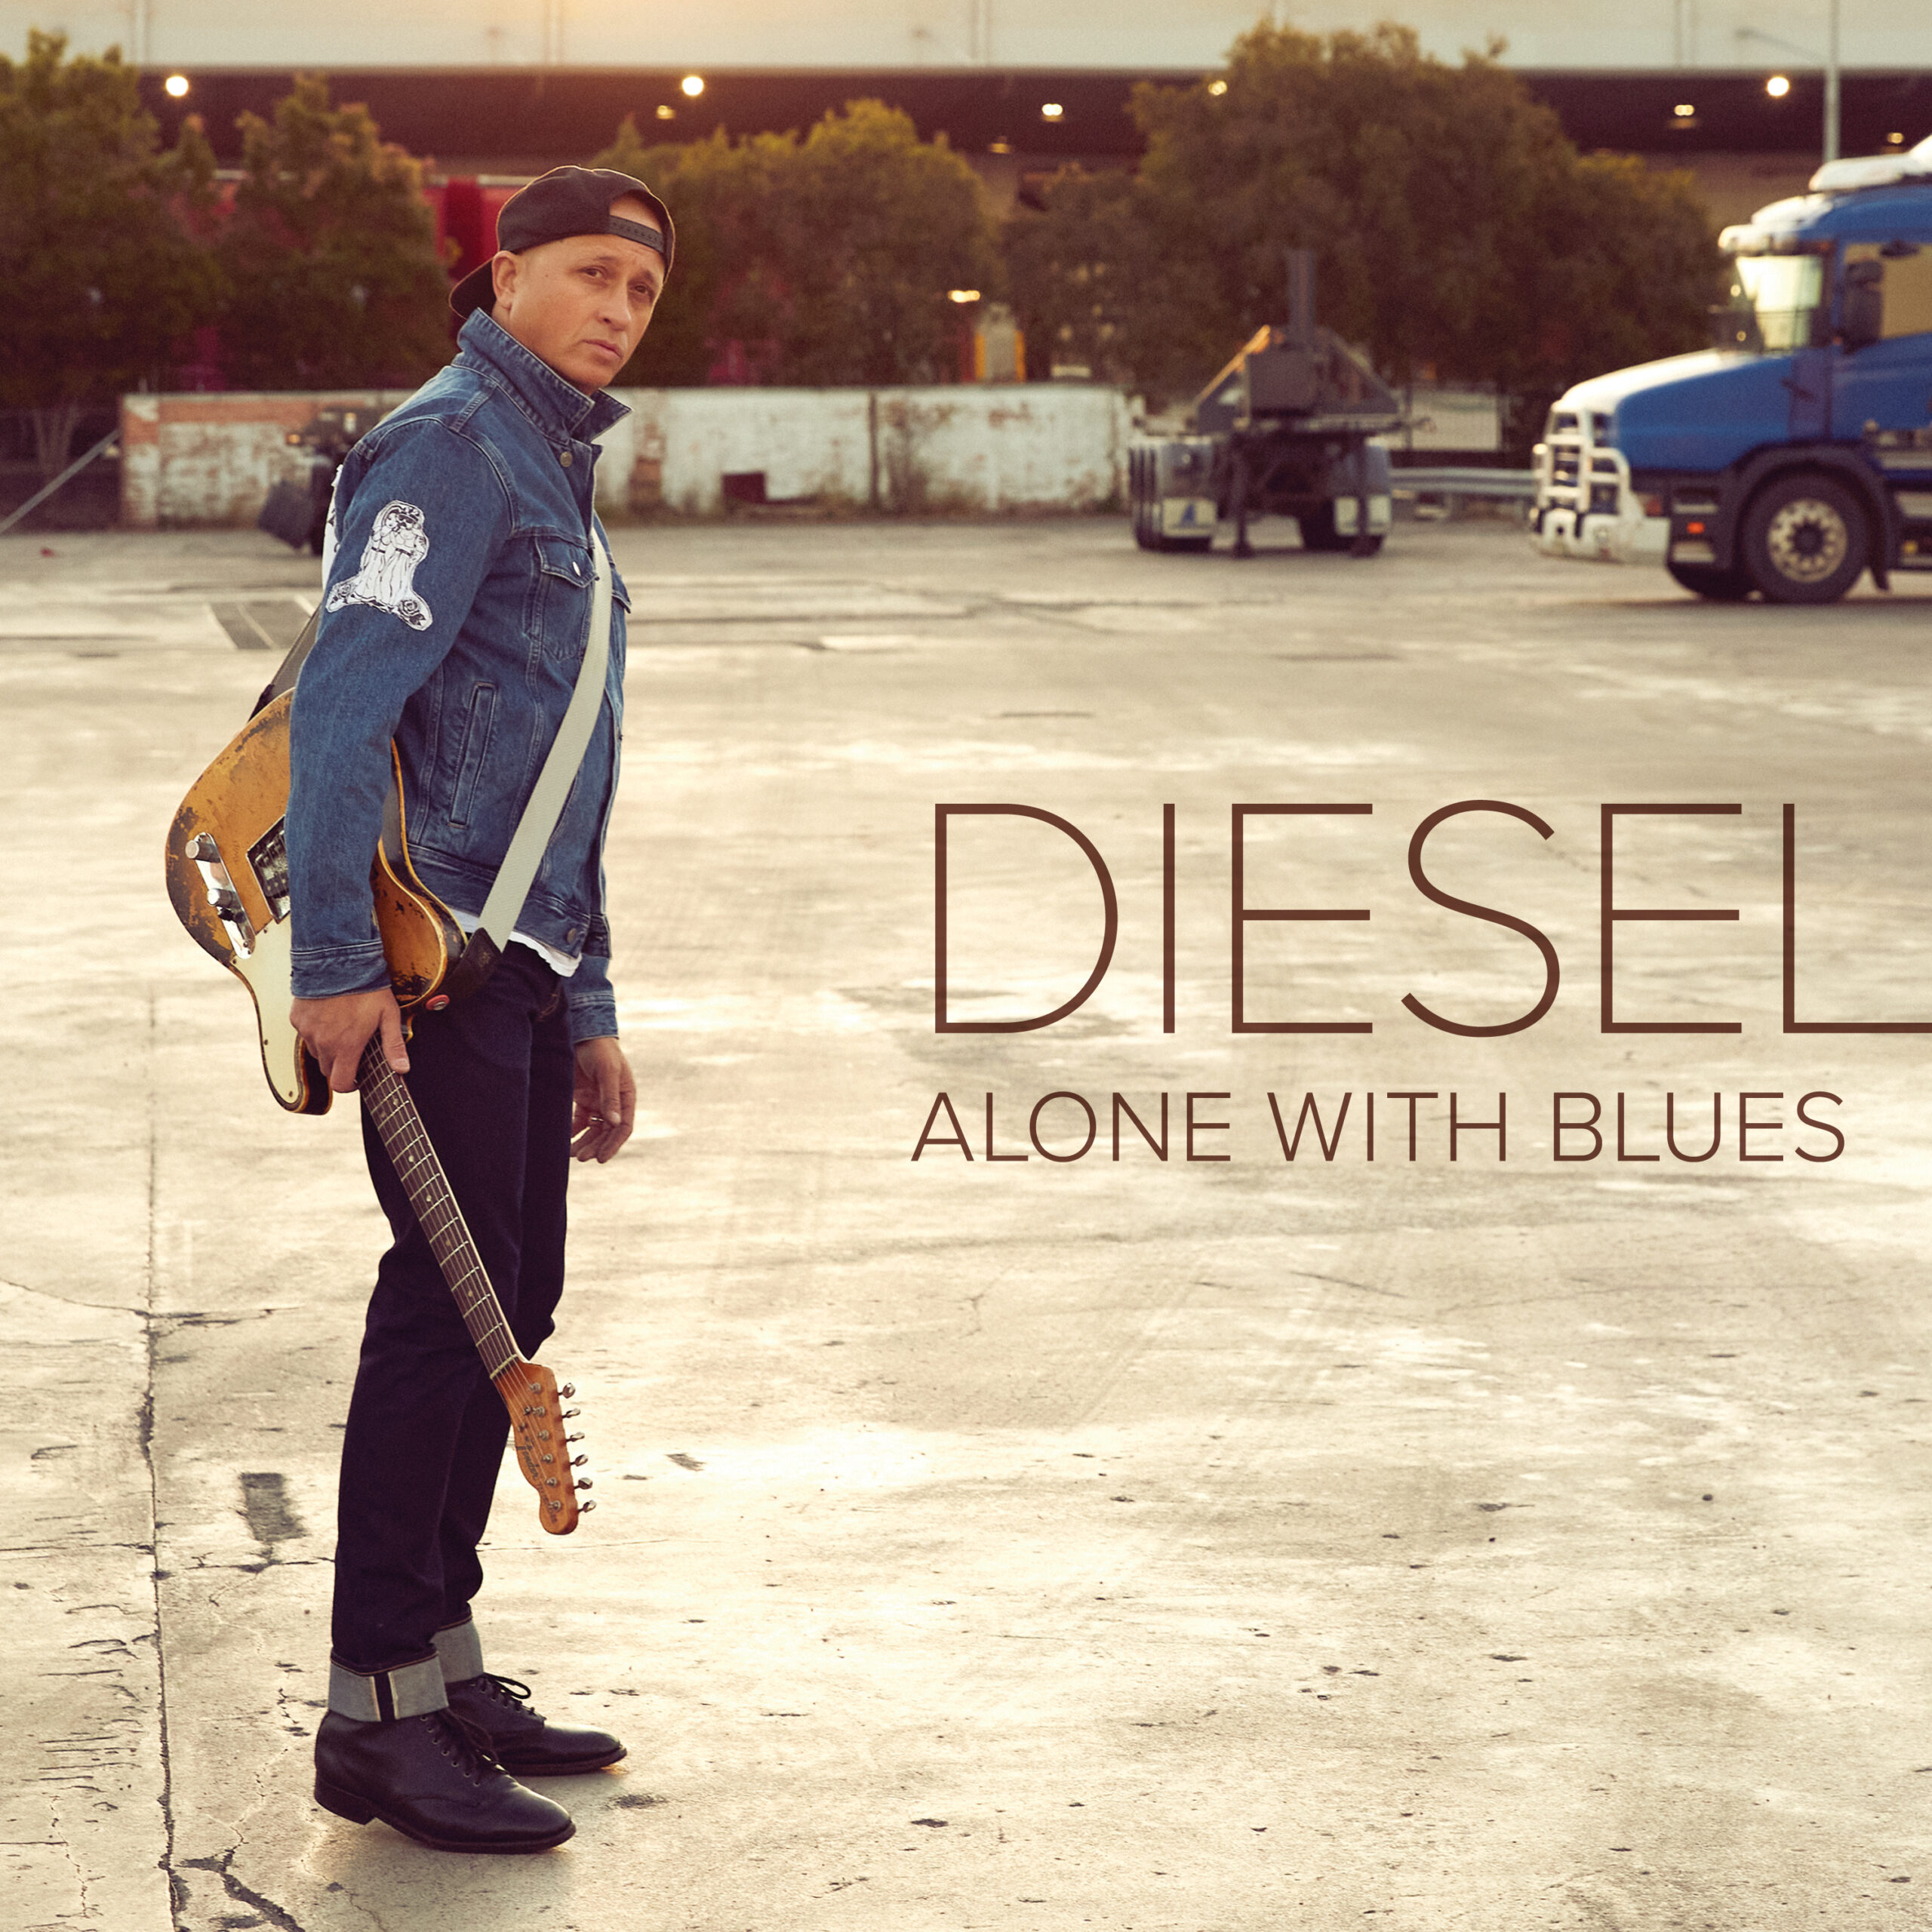 DIESEL NEW ALBUM ALONE WITH BLUES OUT NOW